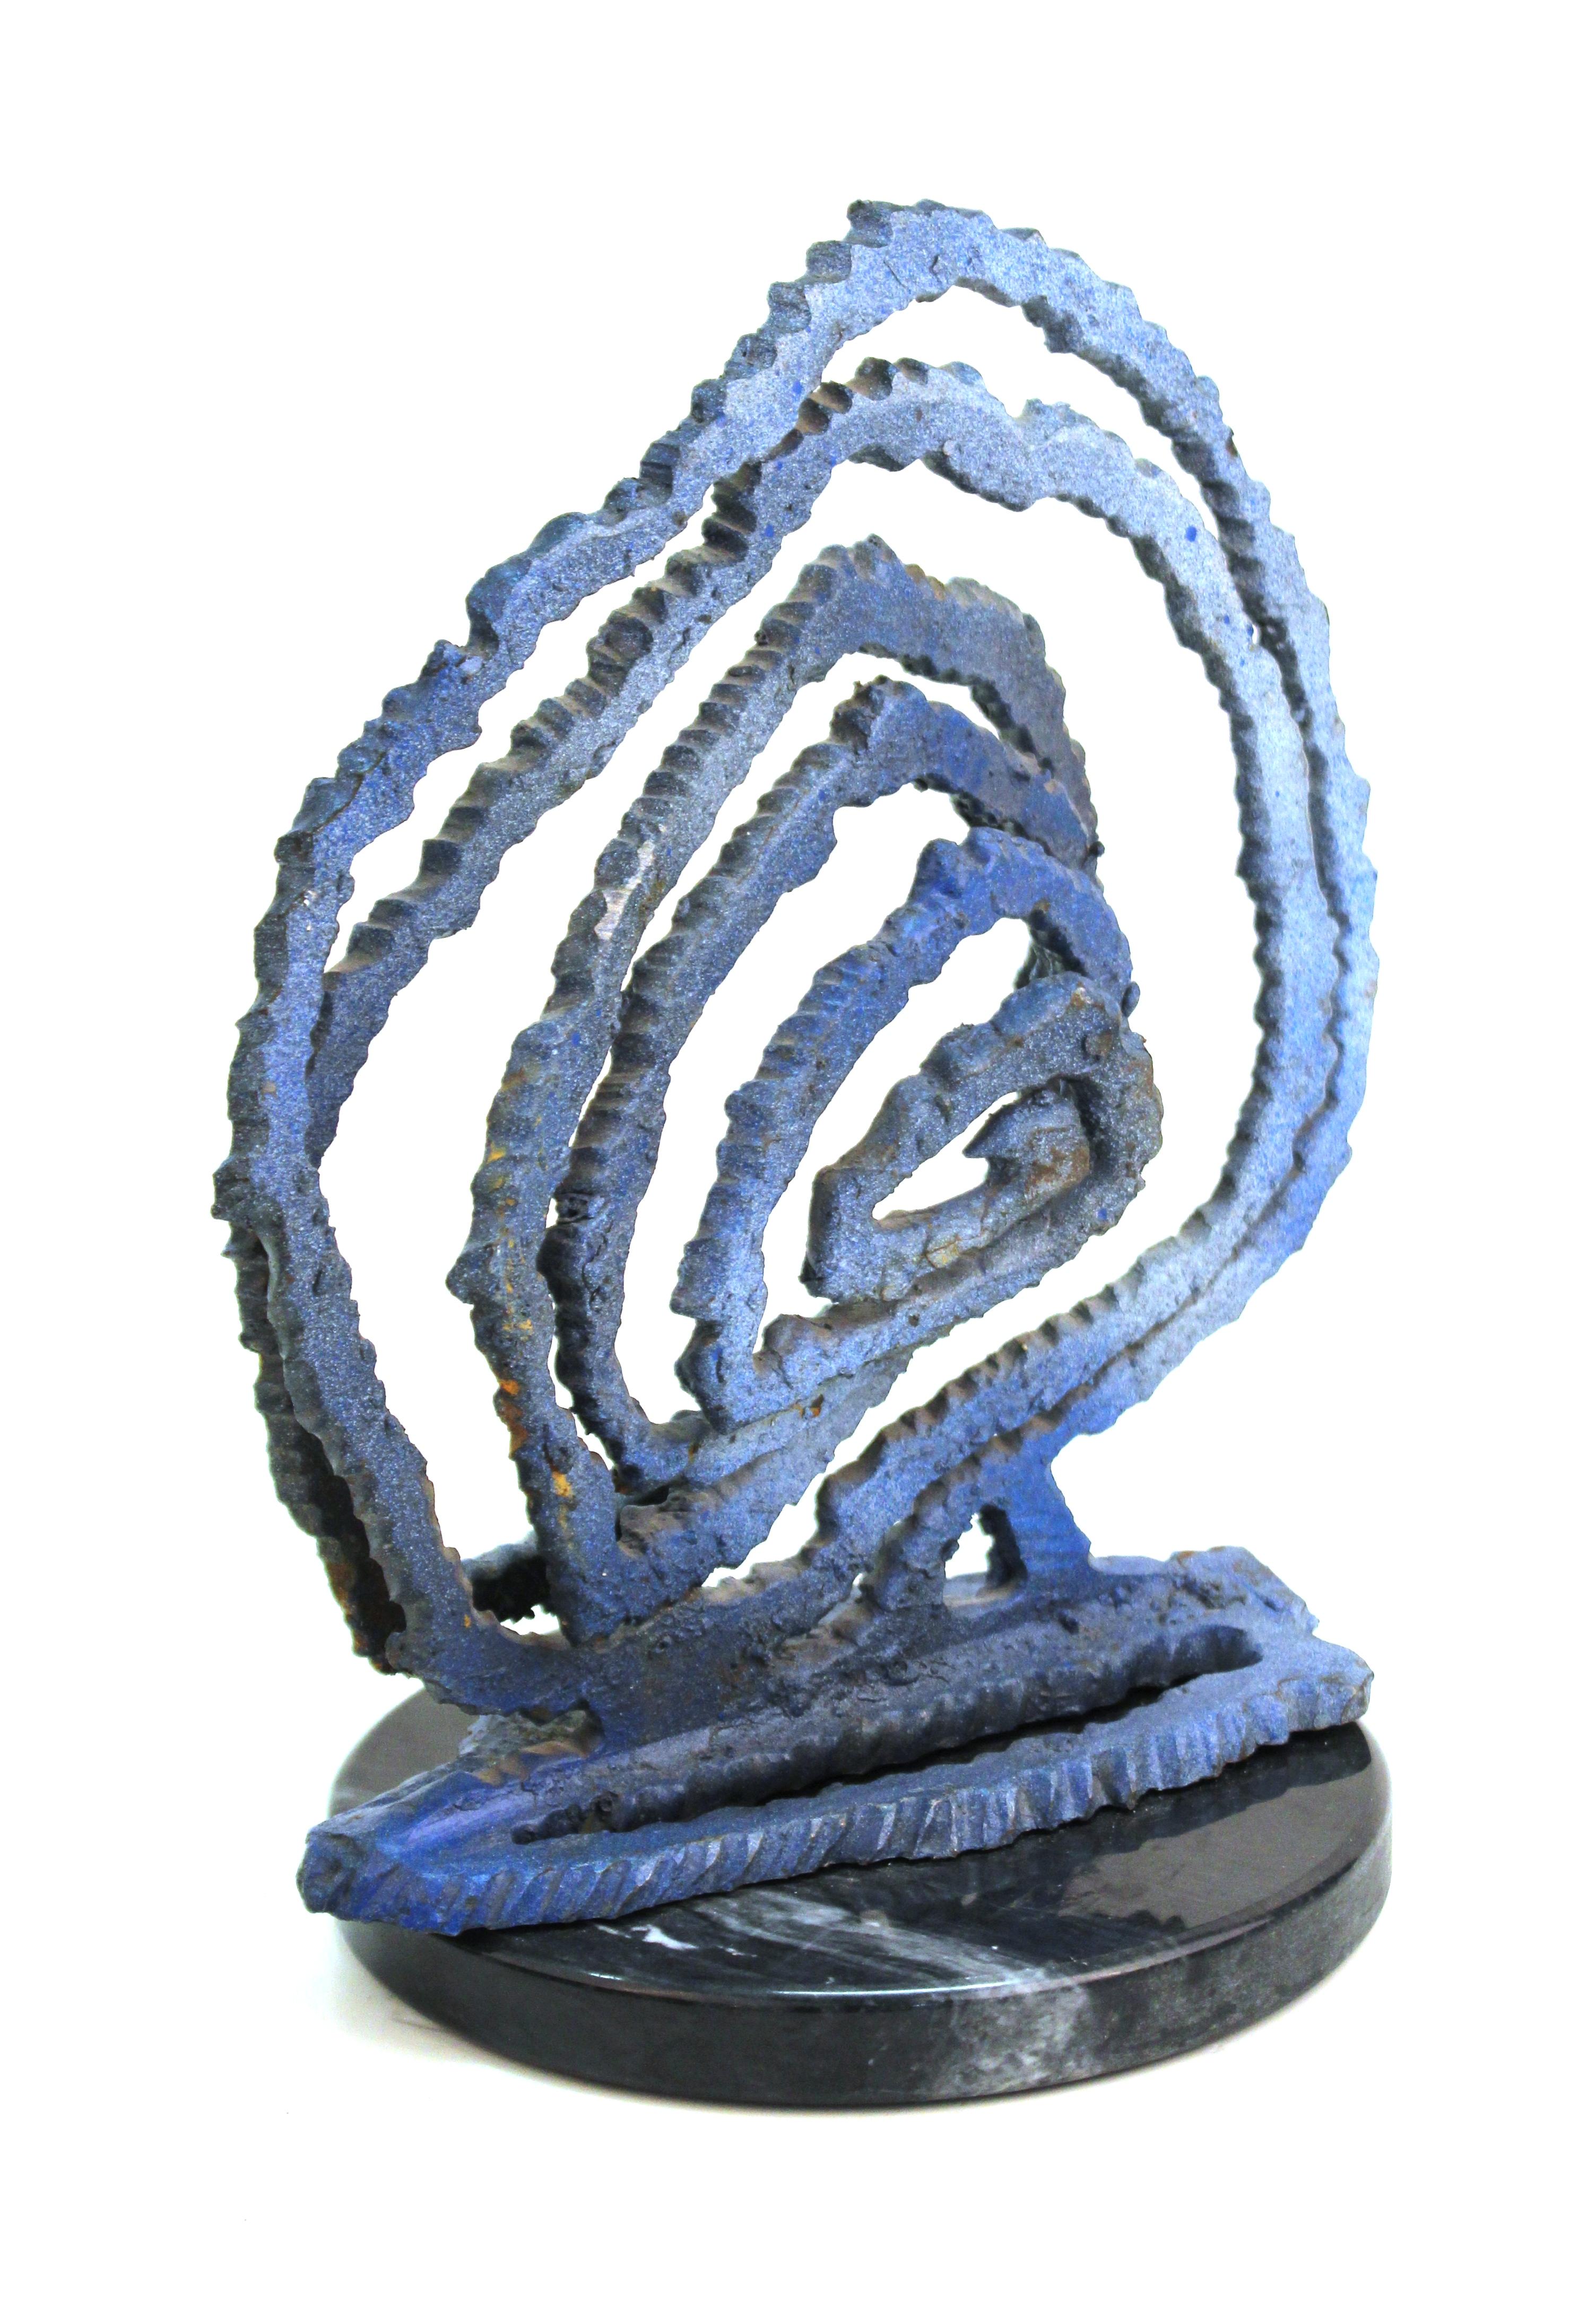 Brutalist modern abstract tabletop sculpture depicting a cut metal spiral atop a marble base. The piece is spray-painted in a blue finish and remains unsigned. In great vintage condition with age-appropriate wear.